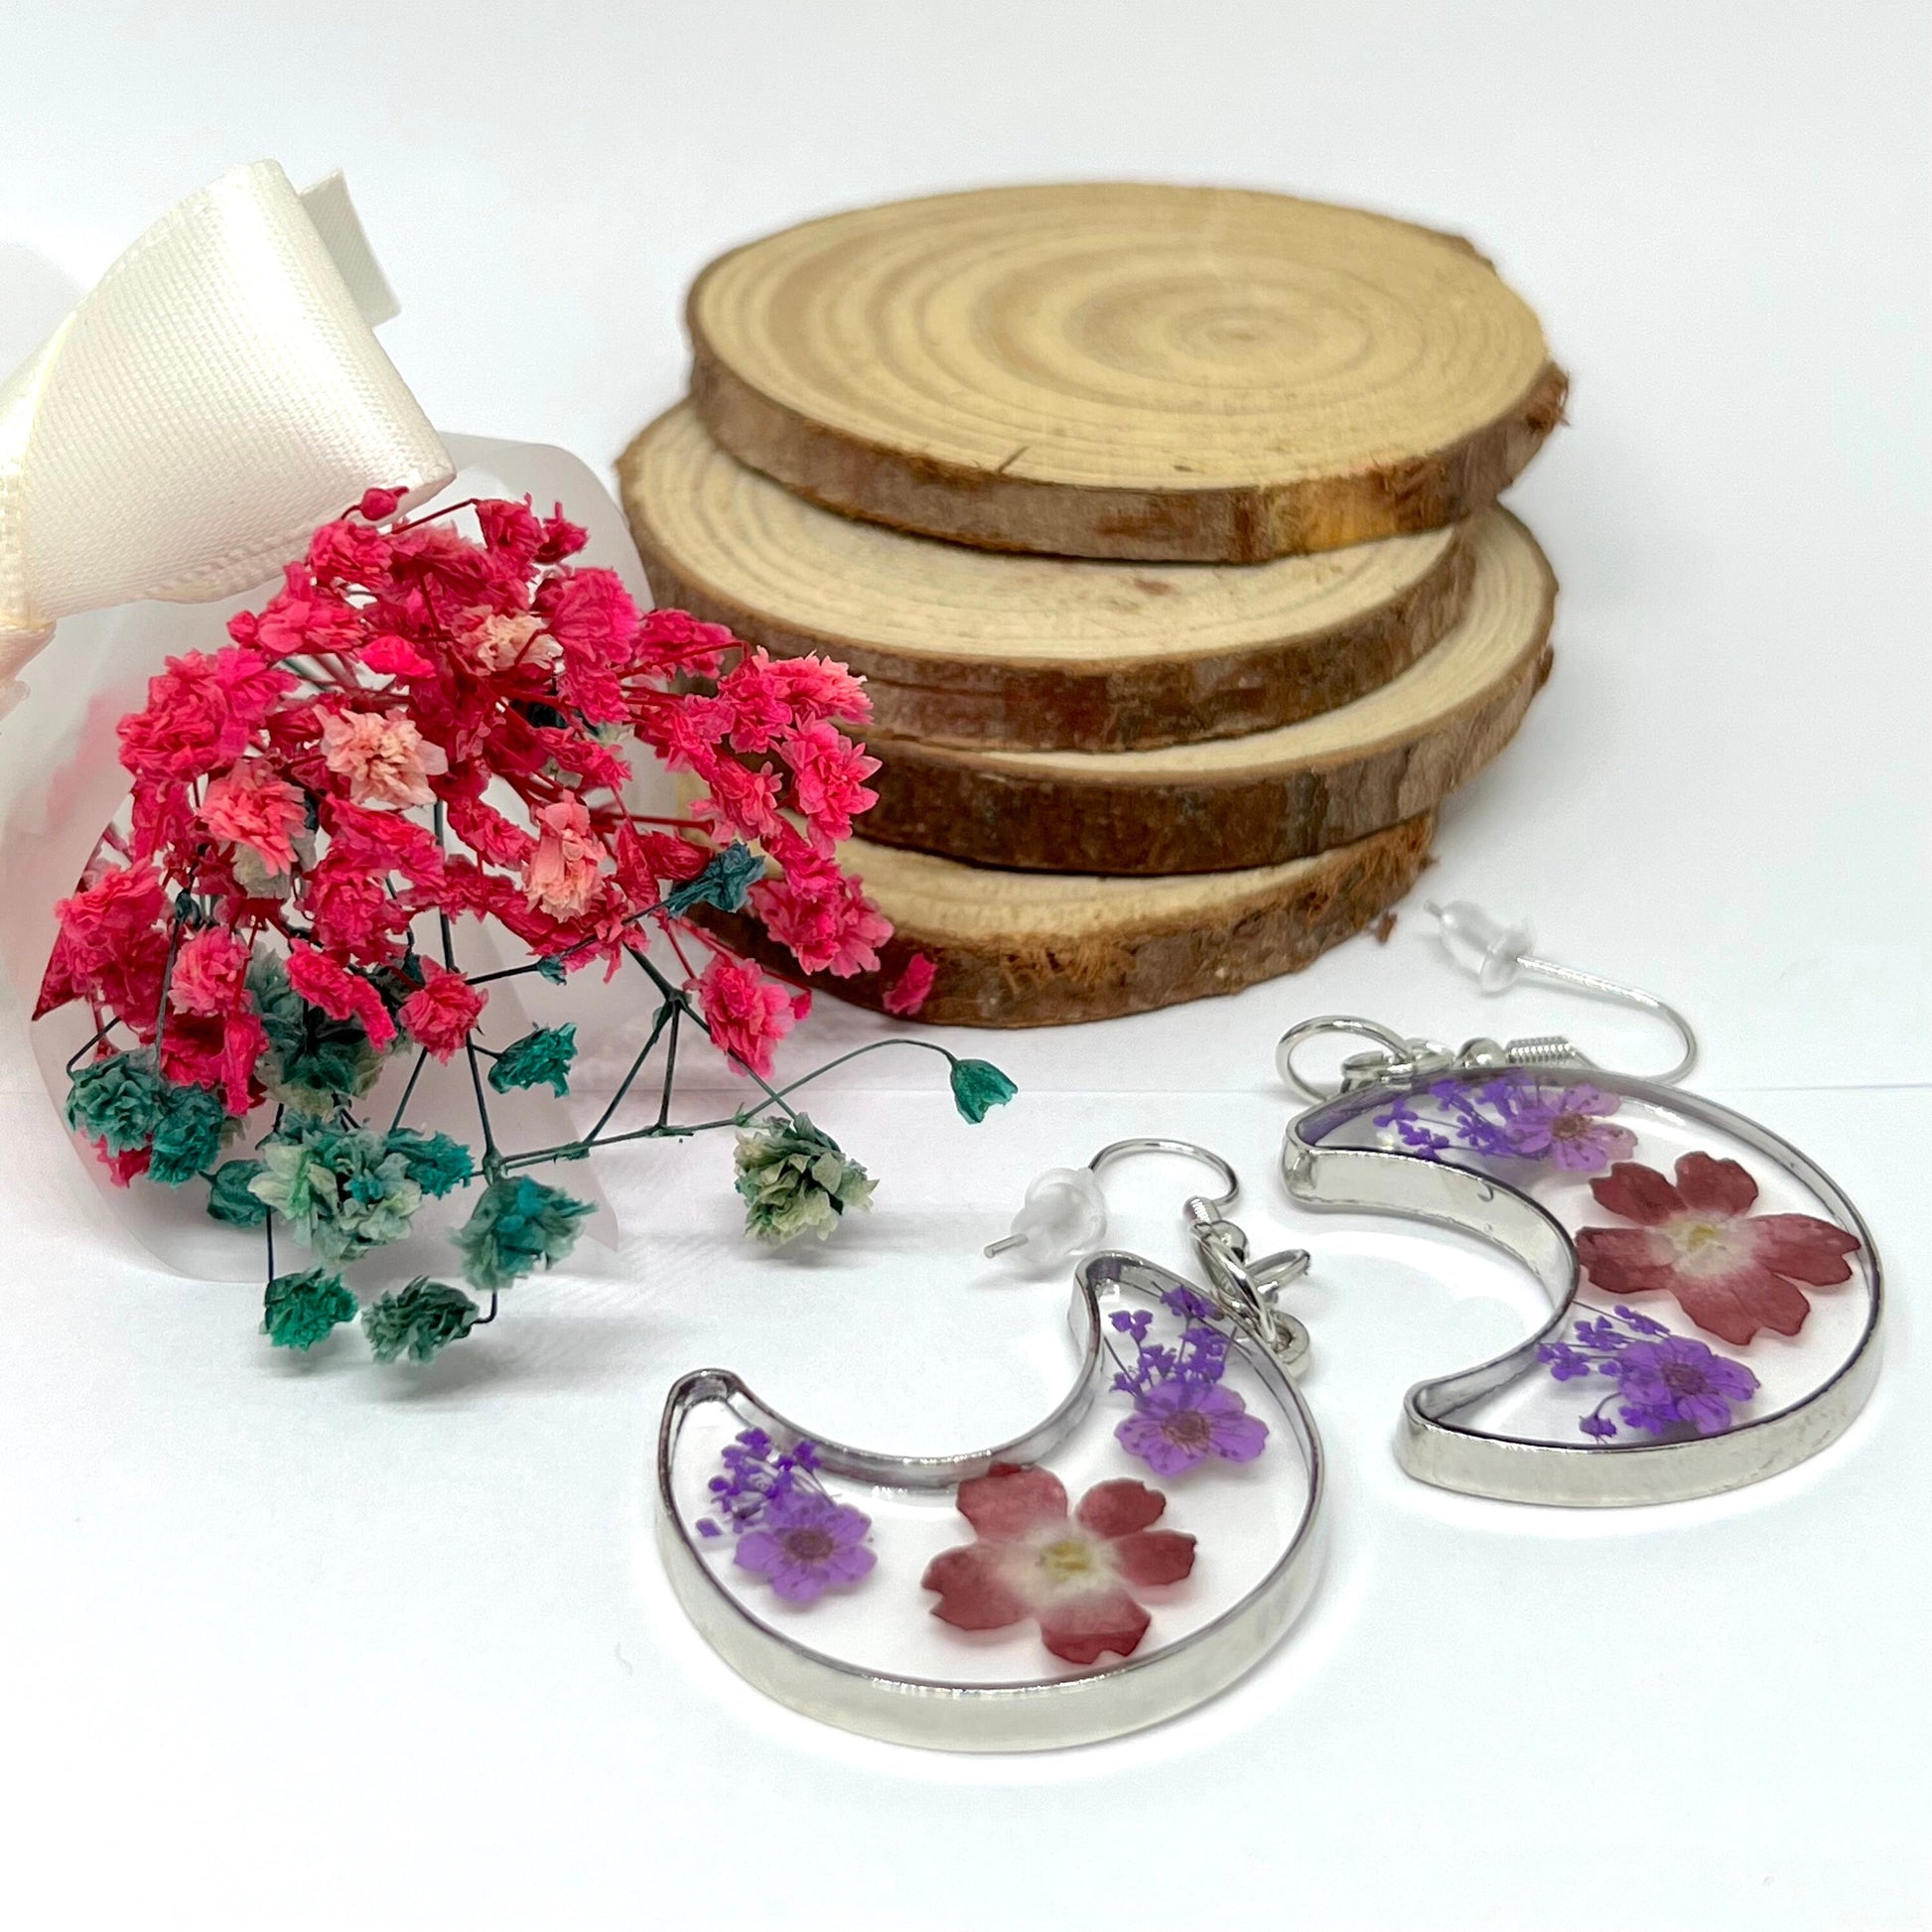 Lovingly Crafted Moon Shape Earrings with Wild Dried Flowers Frida Inspired Jewelry Summer Fashion Casual Outfit Girls Women Cute Gift Idea